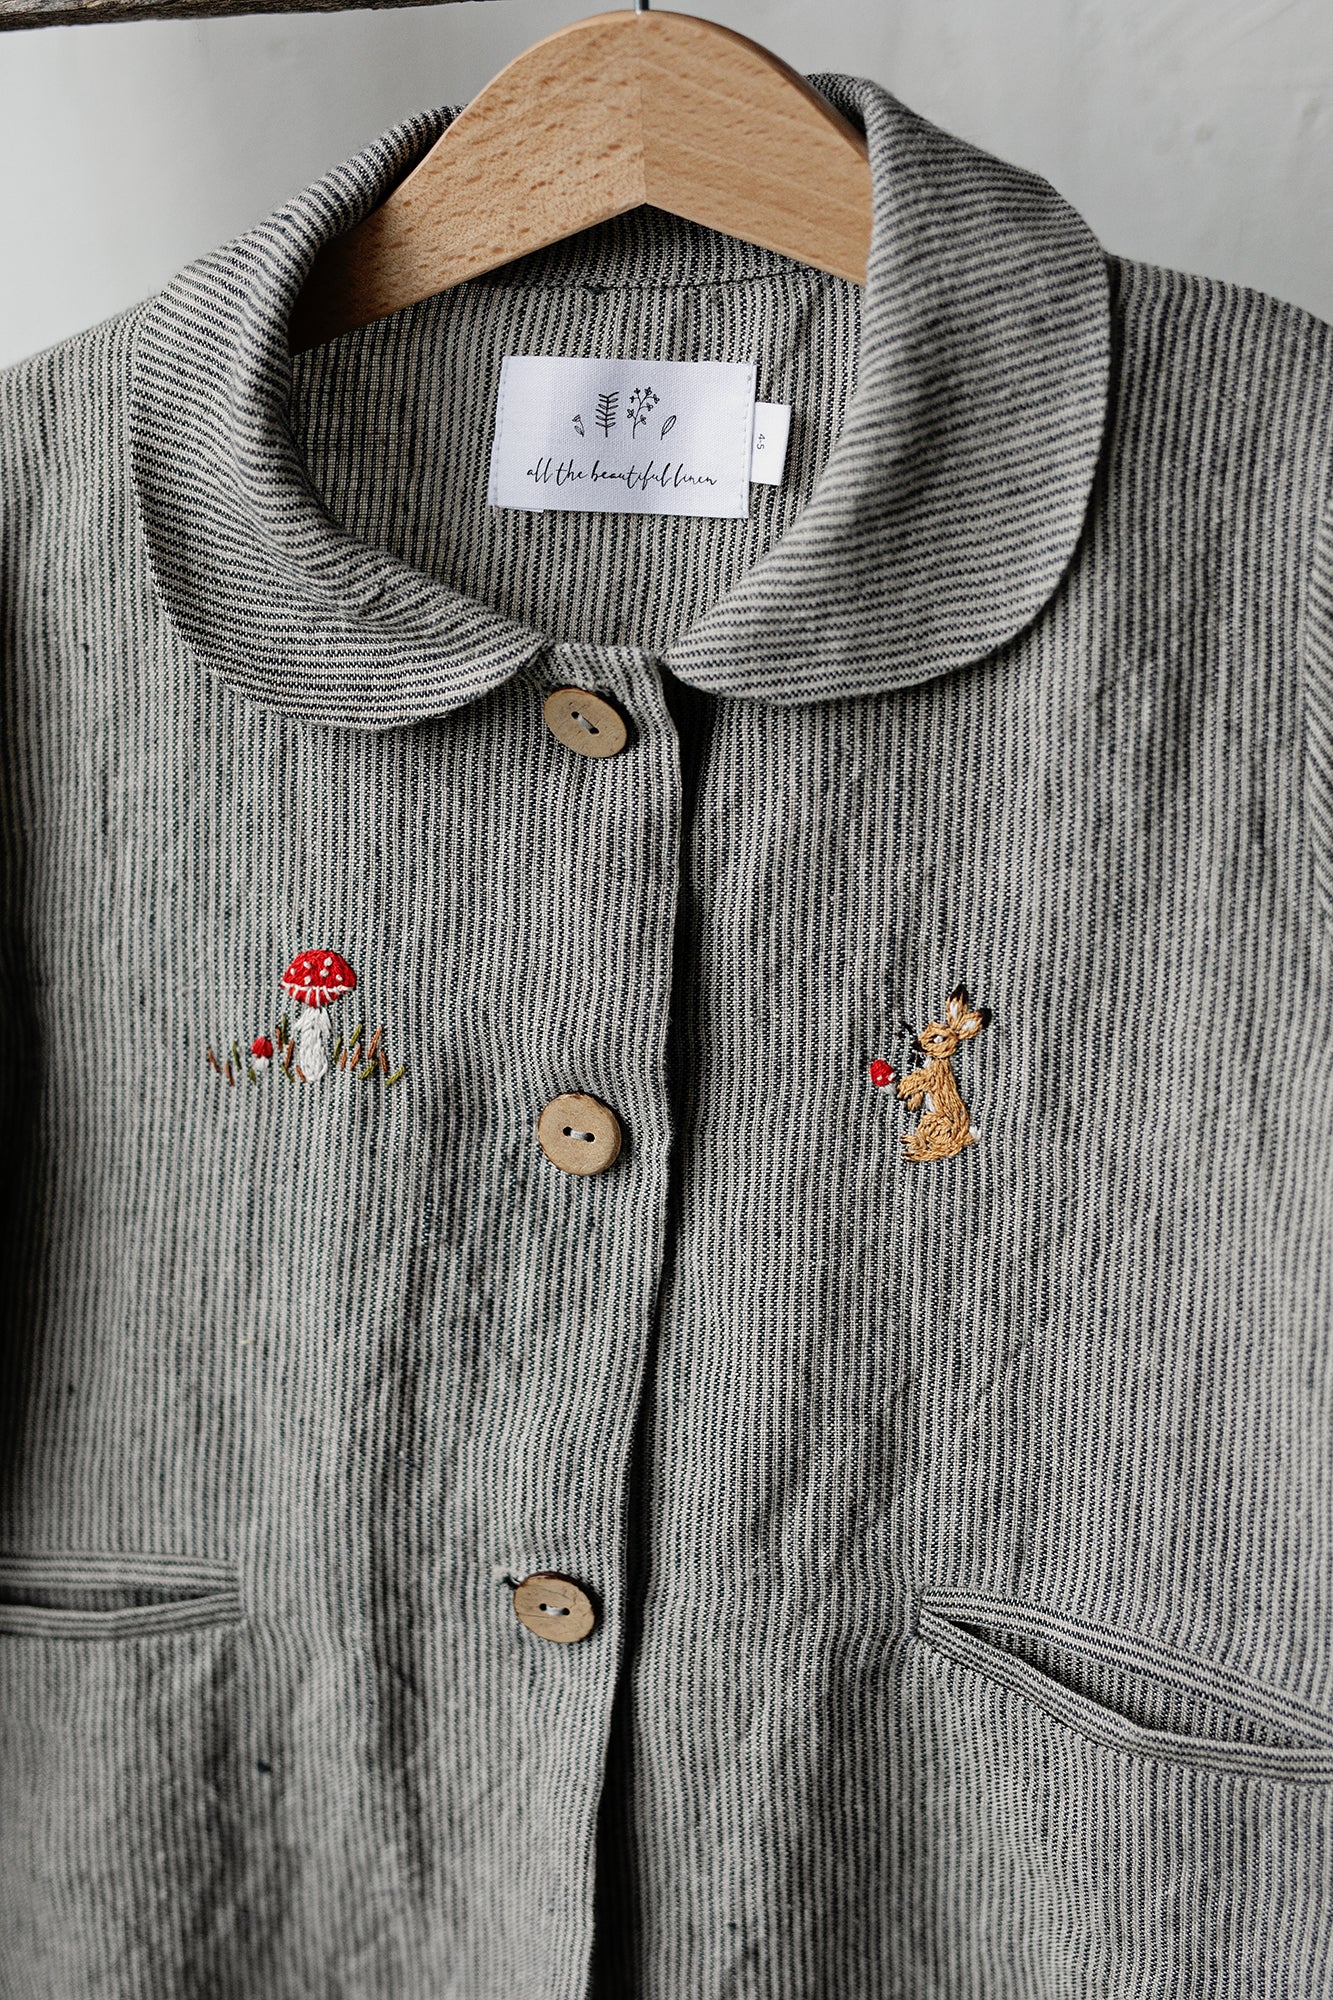 a gray jacket with small embroidered animals on it